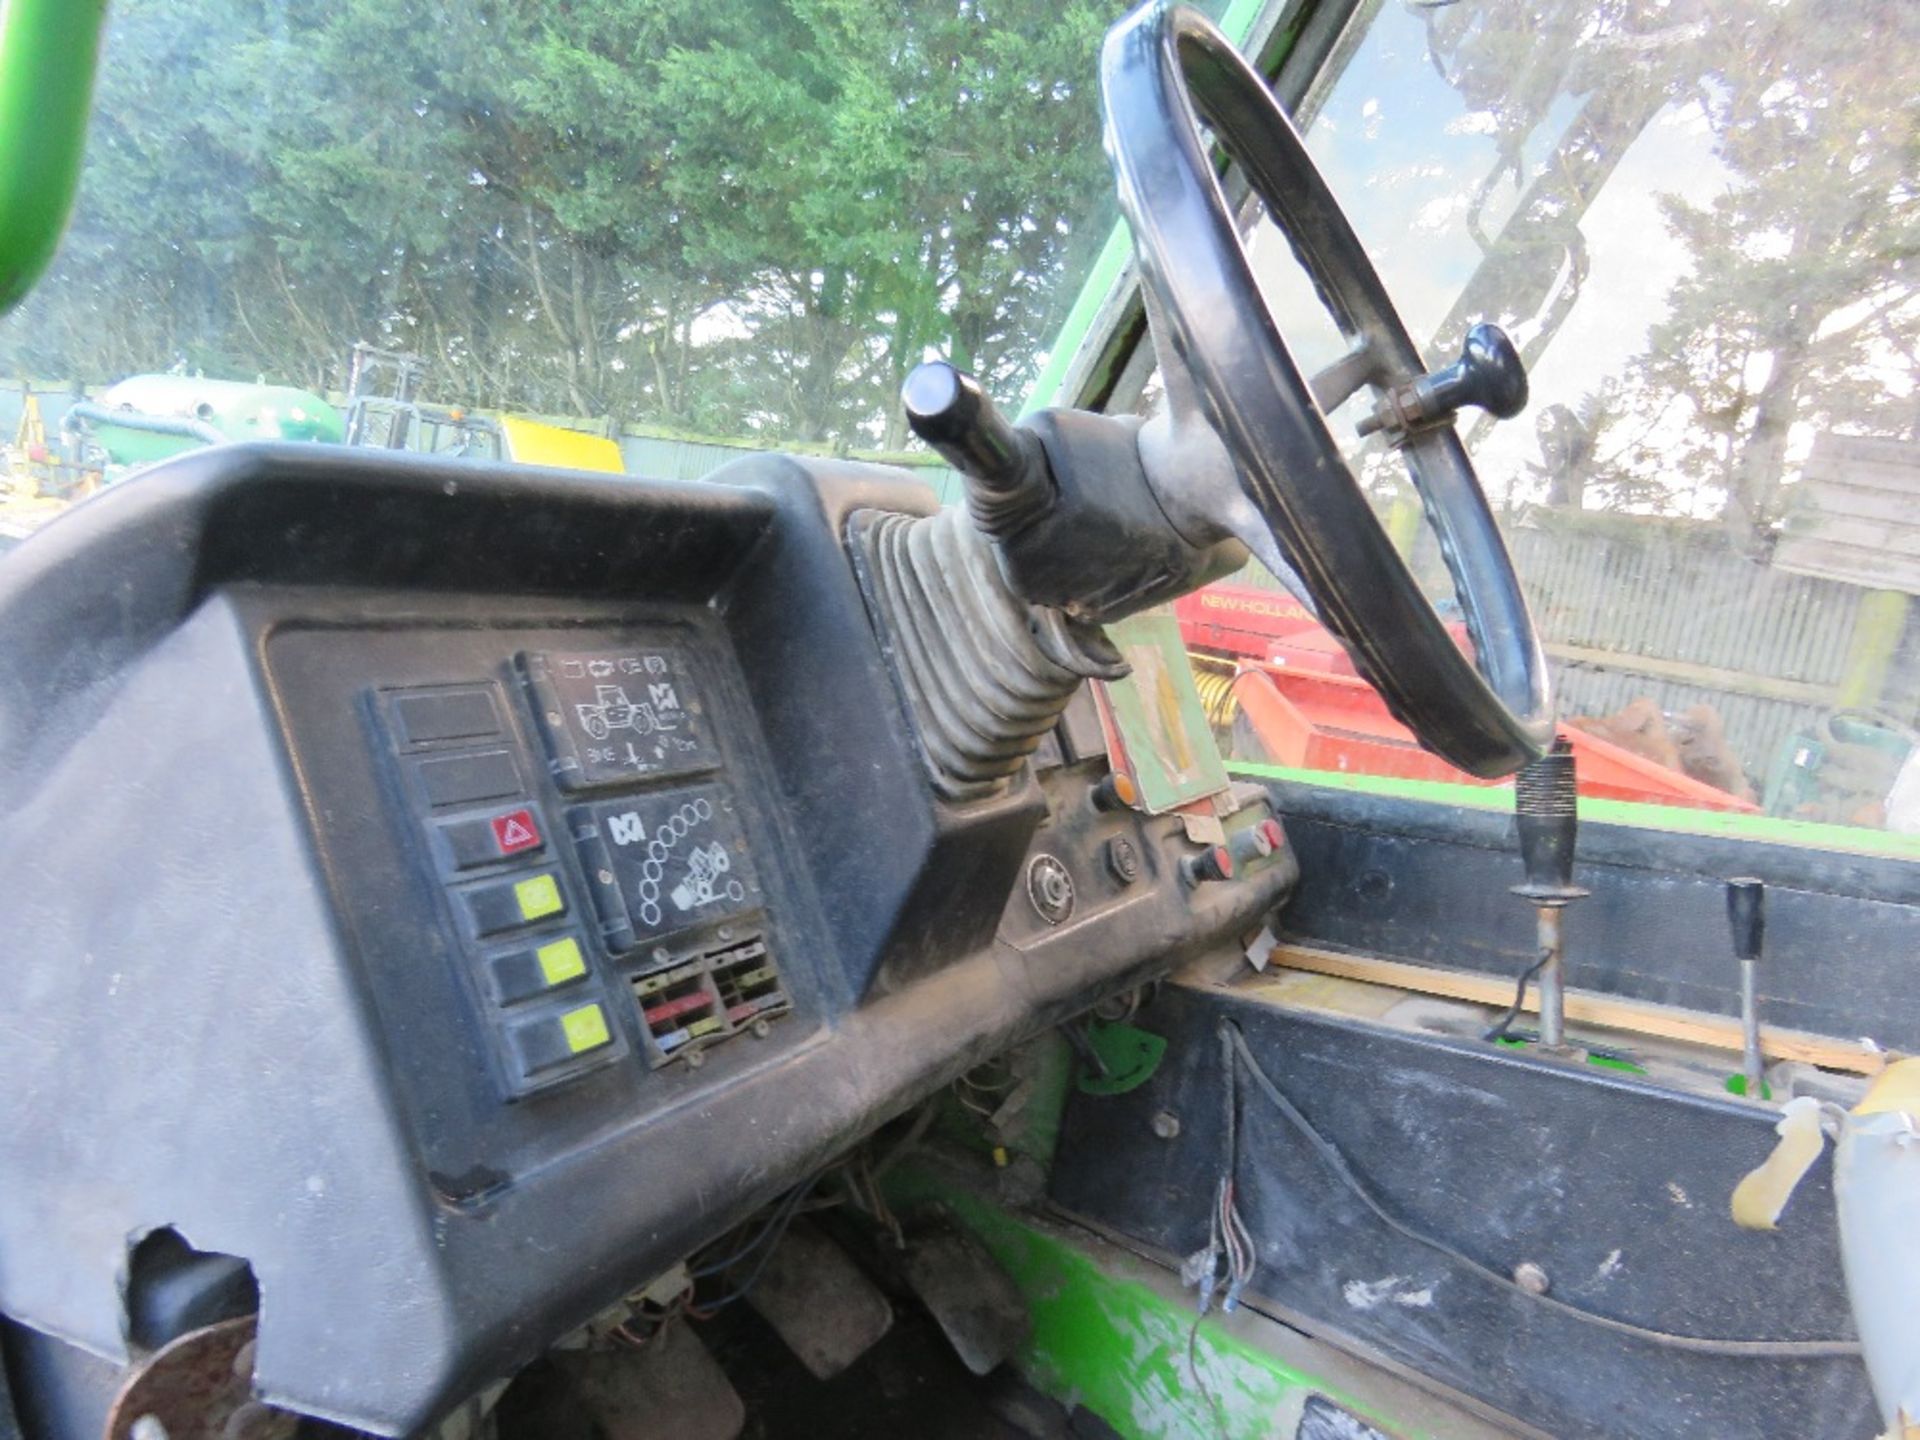 MERLO P27.7EVS TELEHANDLER. 6326 RECORDED HOURS. PERKINS ENGINE. SN: 4111137 DIRECT FROM LOCAL COMPA - Image 6 of 11